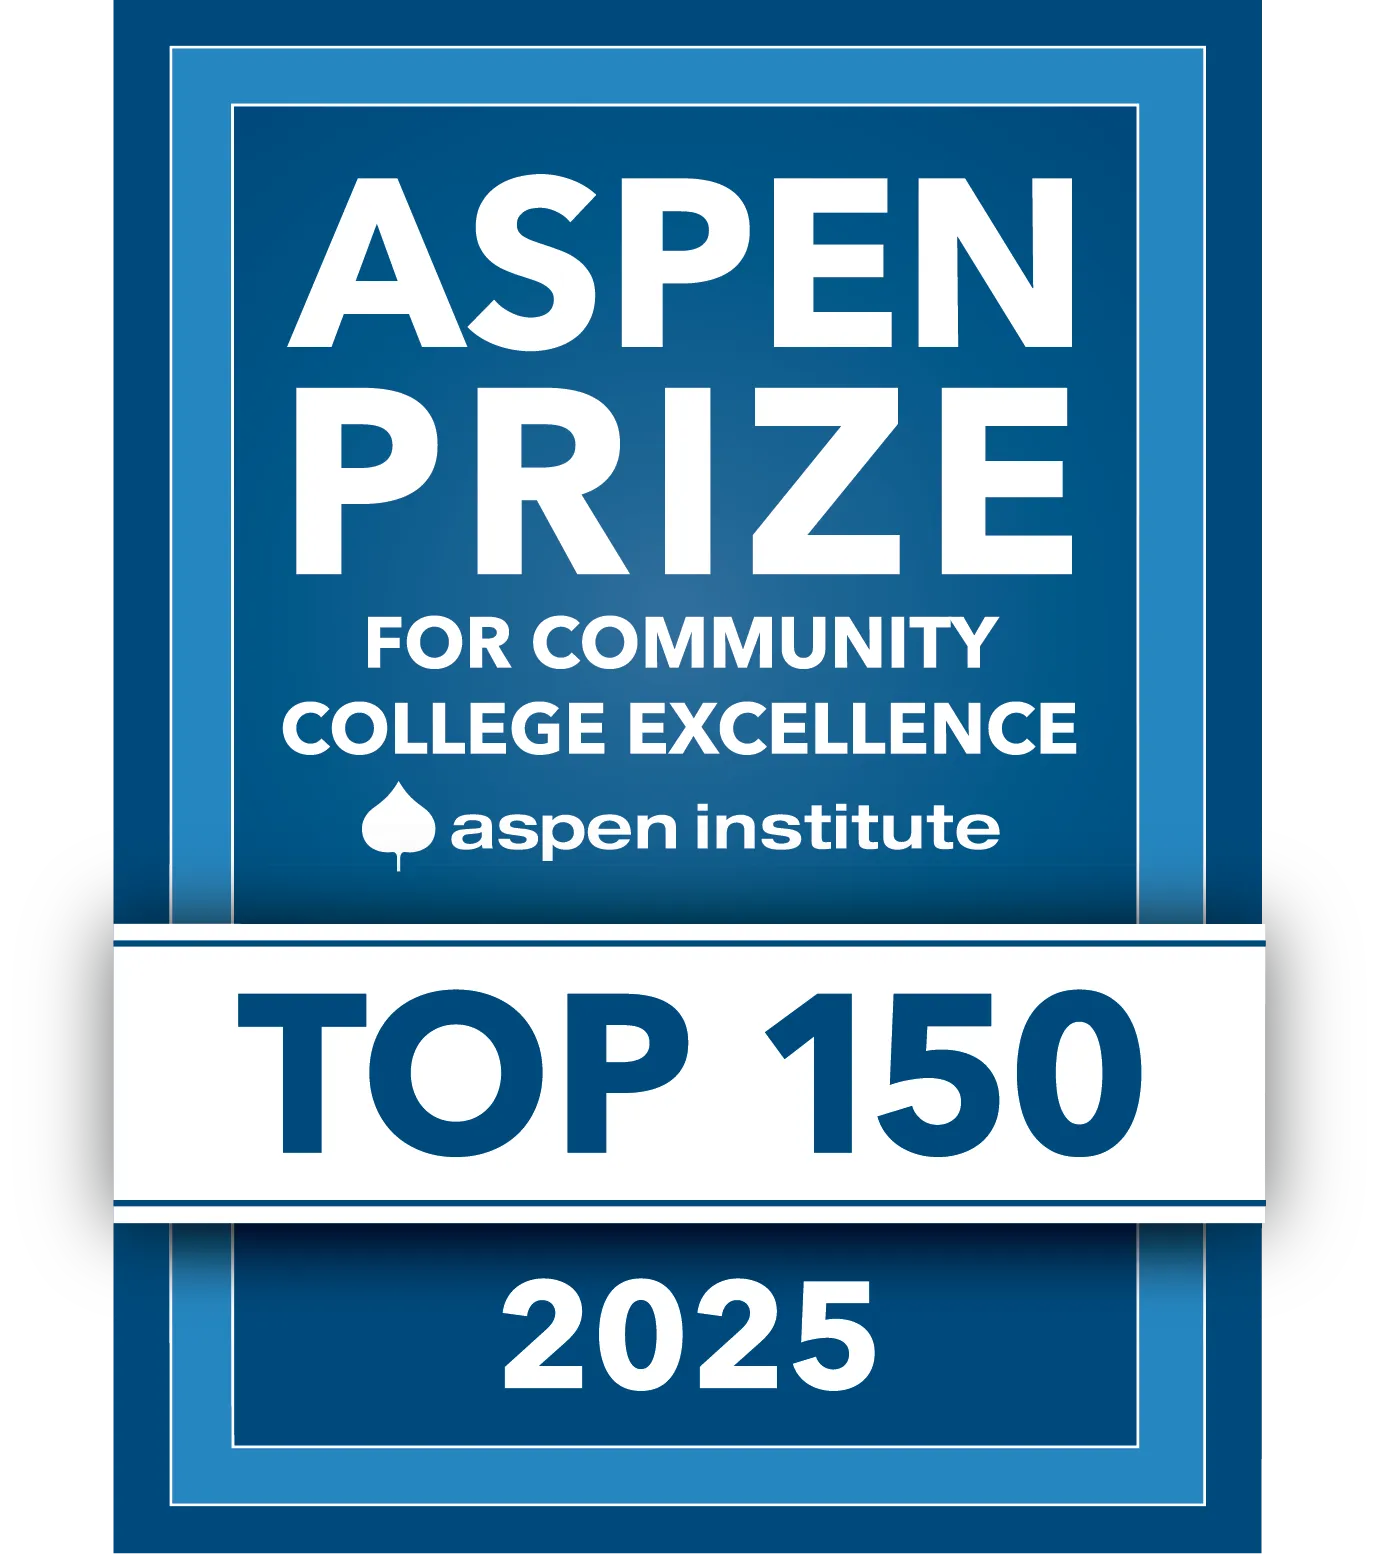 Aspen prize for Community College Excellence Semifinalist 2023